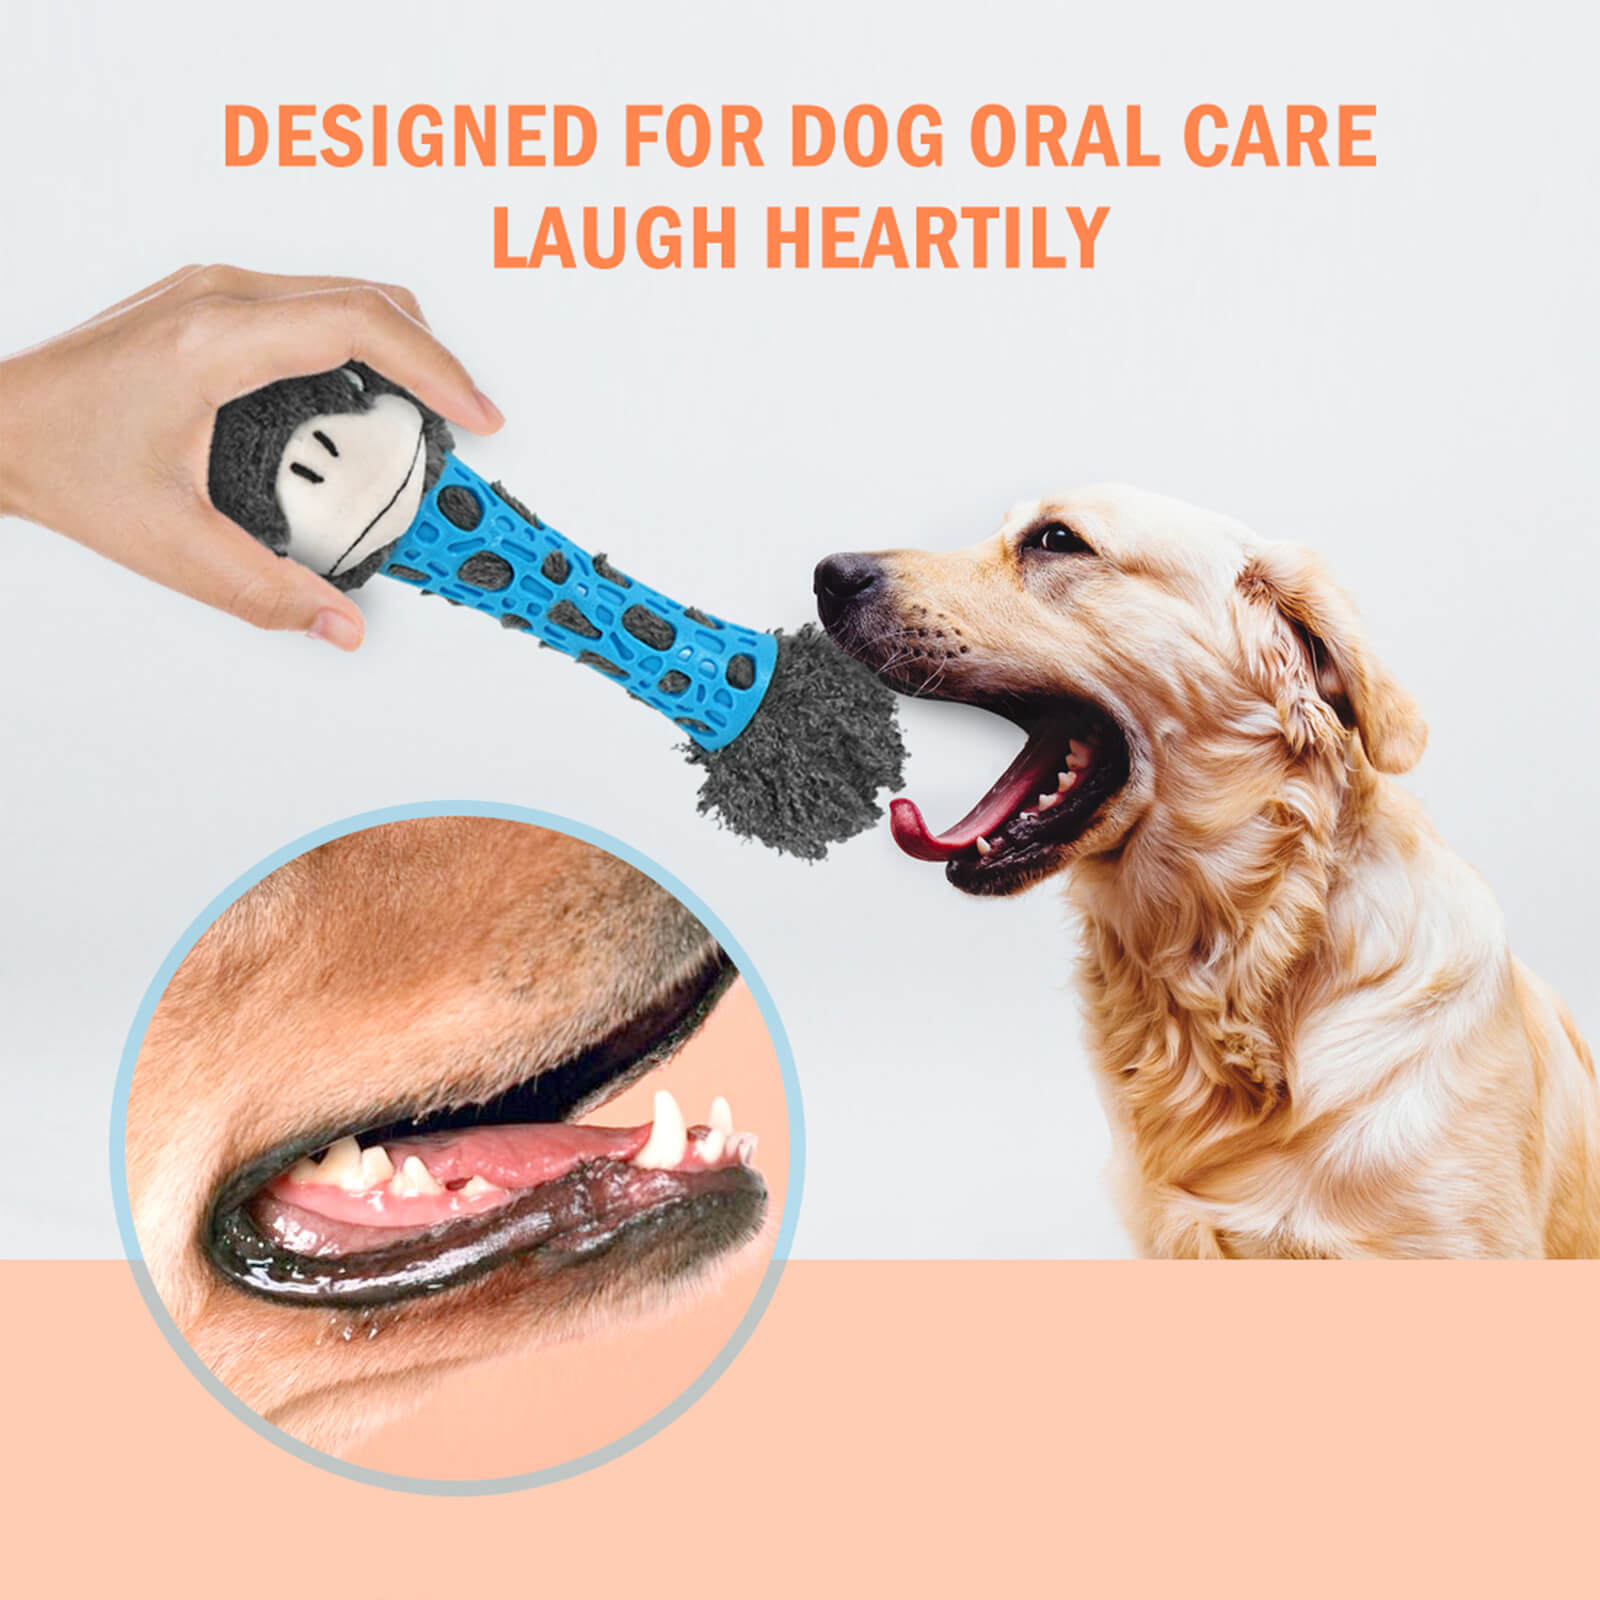 Laifug Chew Squeaky Dog Toy